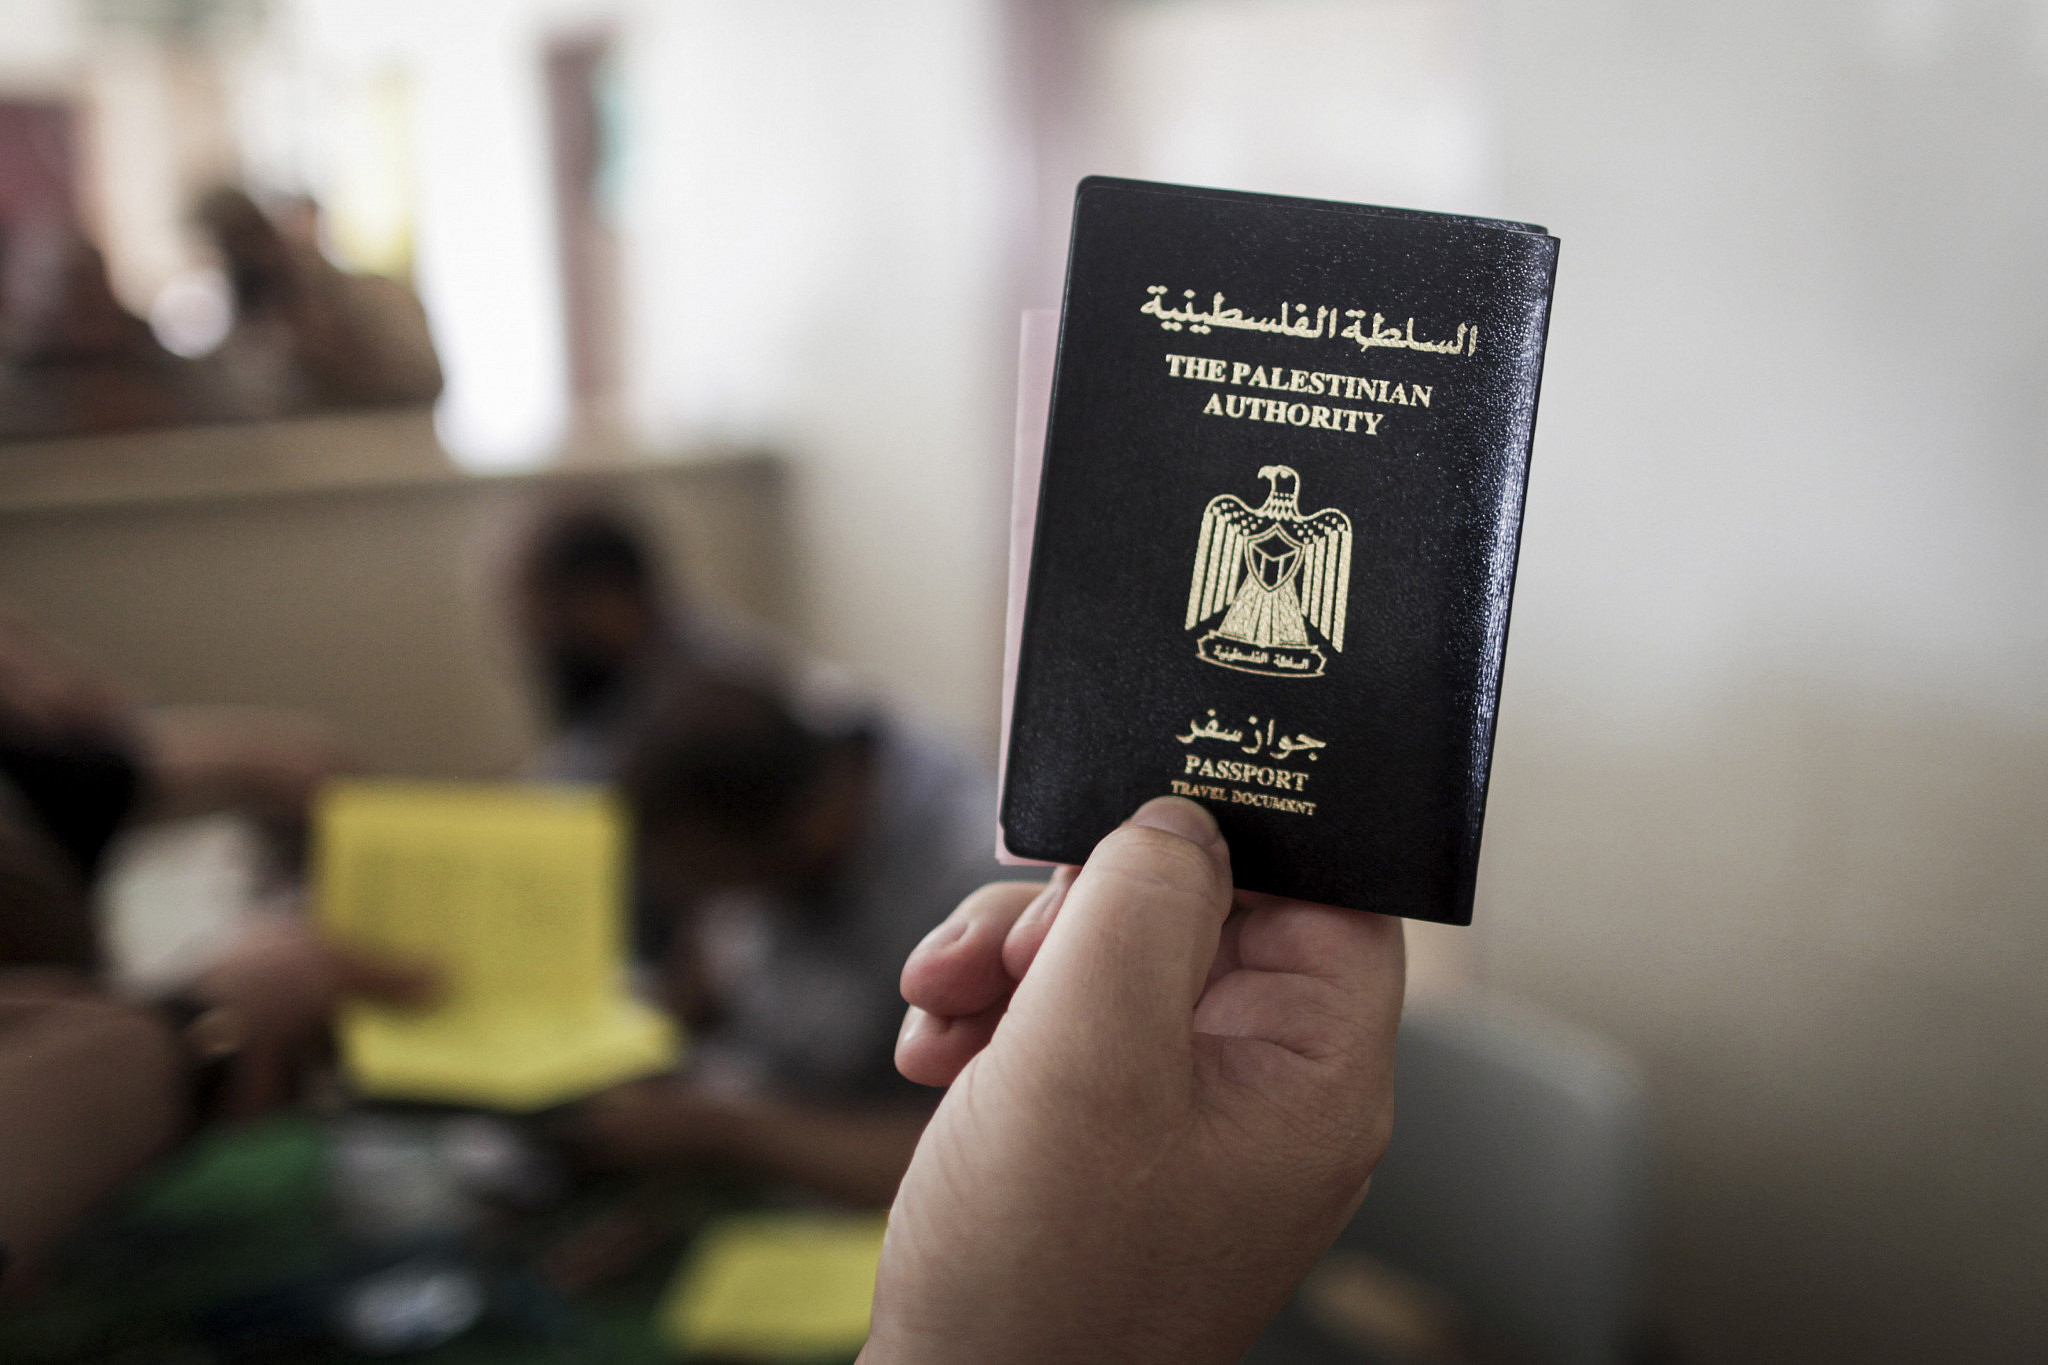 Palestinians gather at the Rafah border crossing in the southern Gaza Strip, as they await permission to enter Egypt, June 12, 2015. (Aaed Tayeh/Flash90)